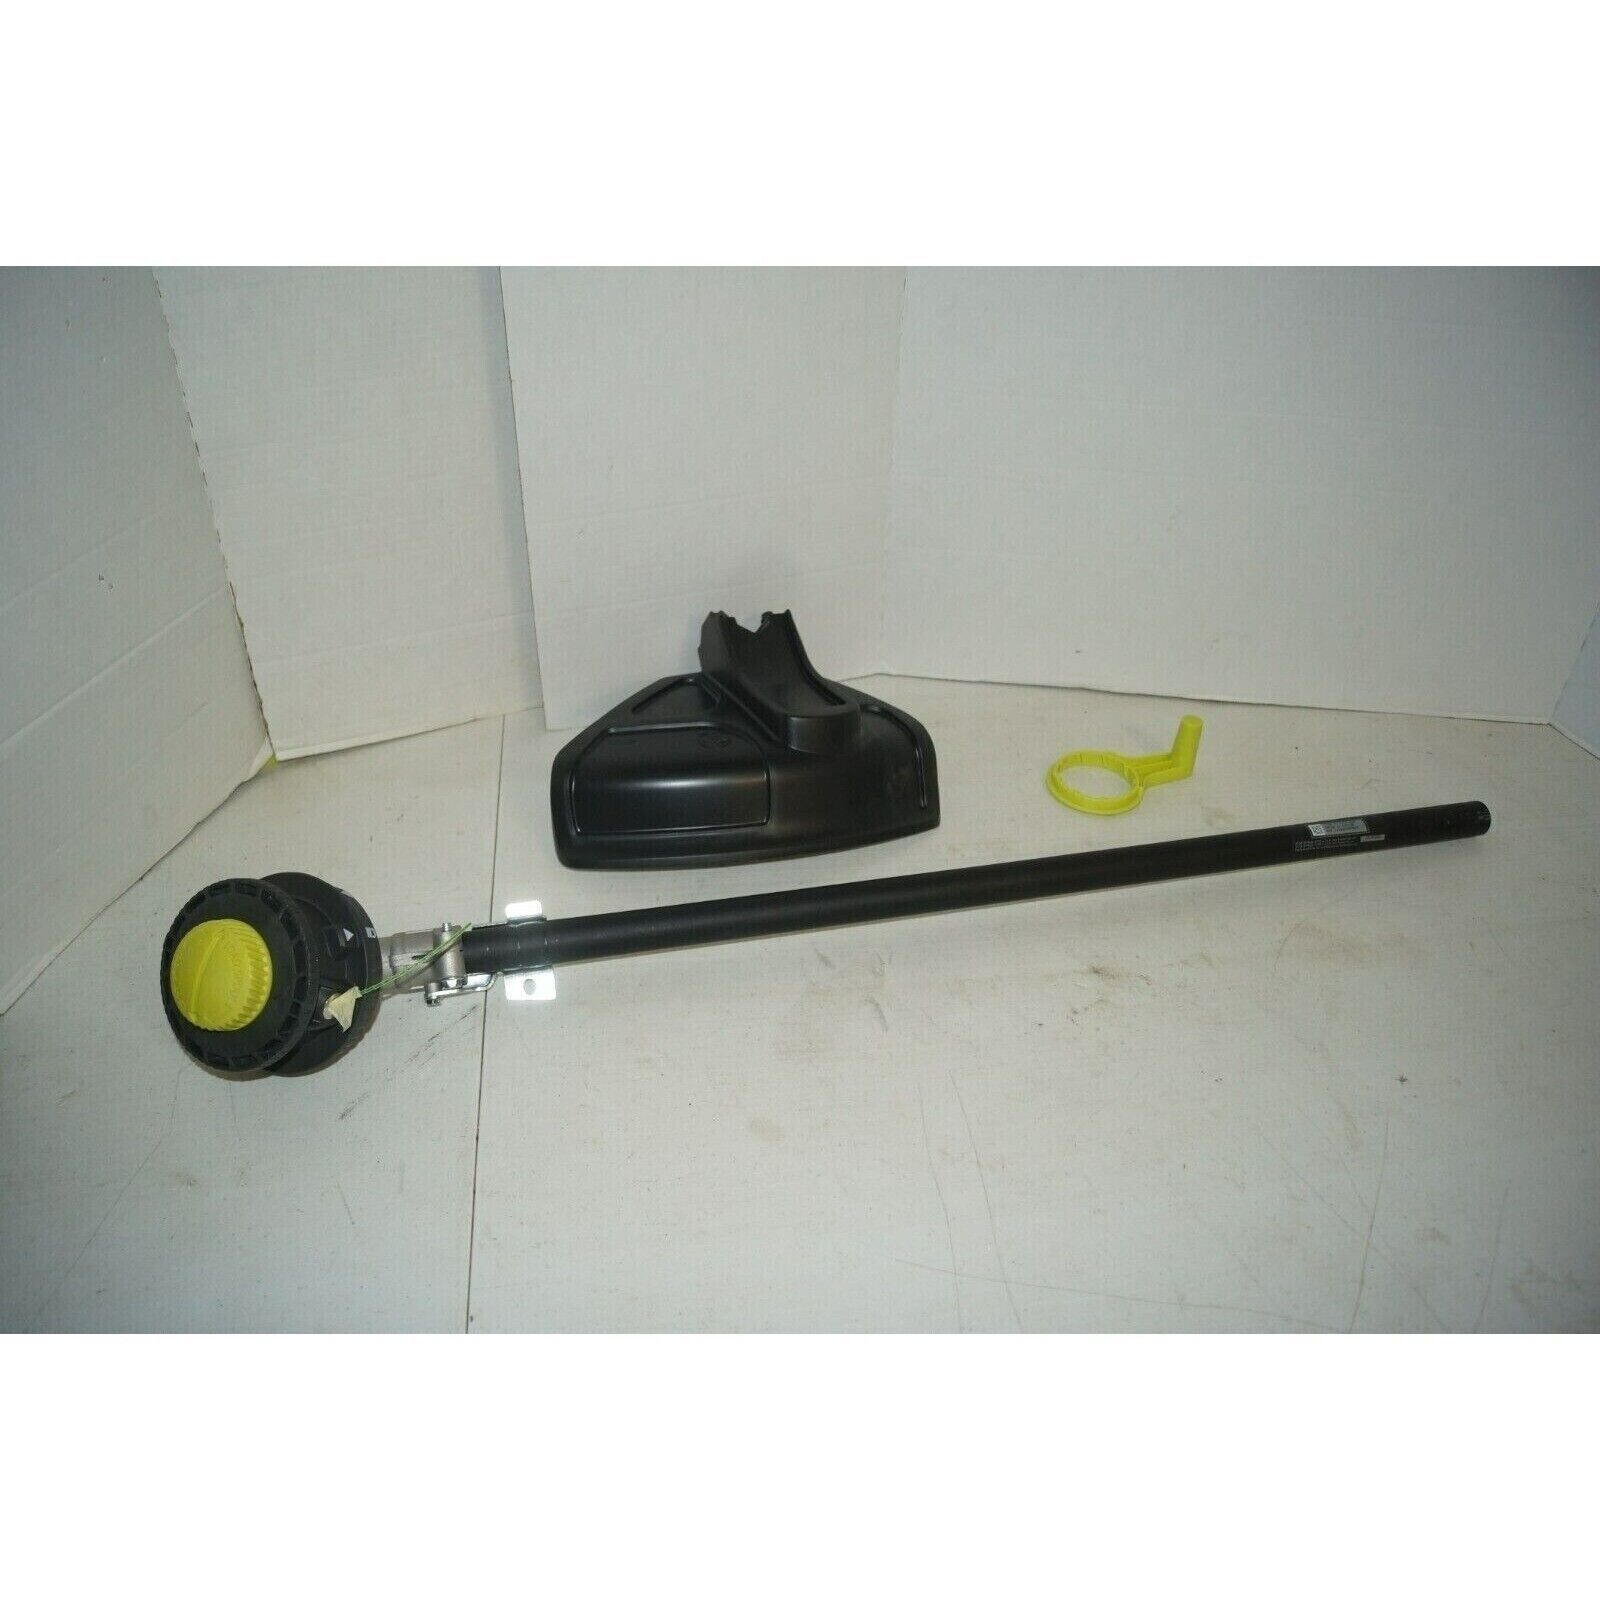 New Ryobi Expand-It Lower Attachment Shaft Trimmer Head & Guard RY15527VNM NO8 - $69.29